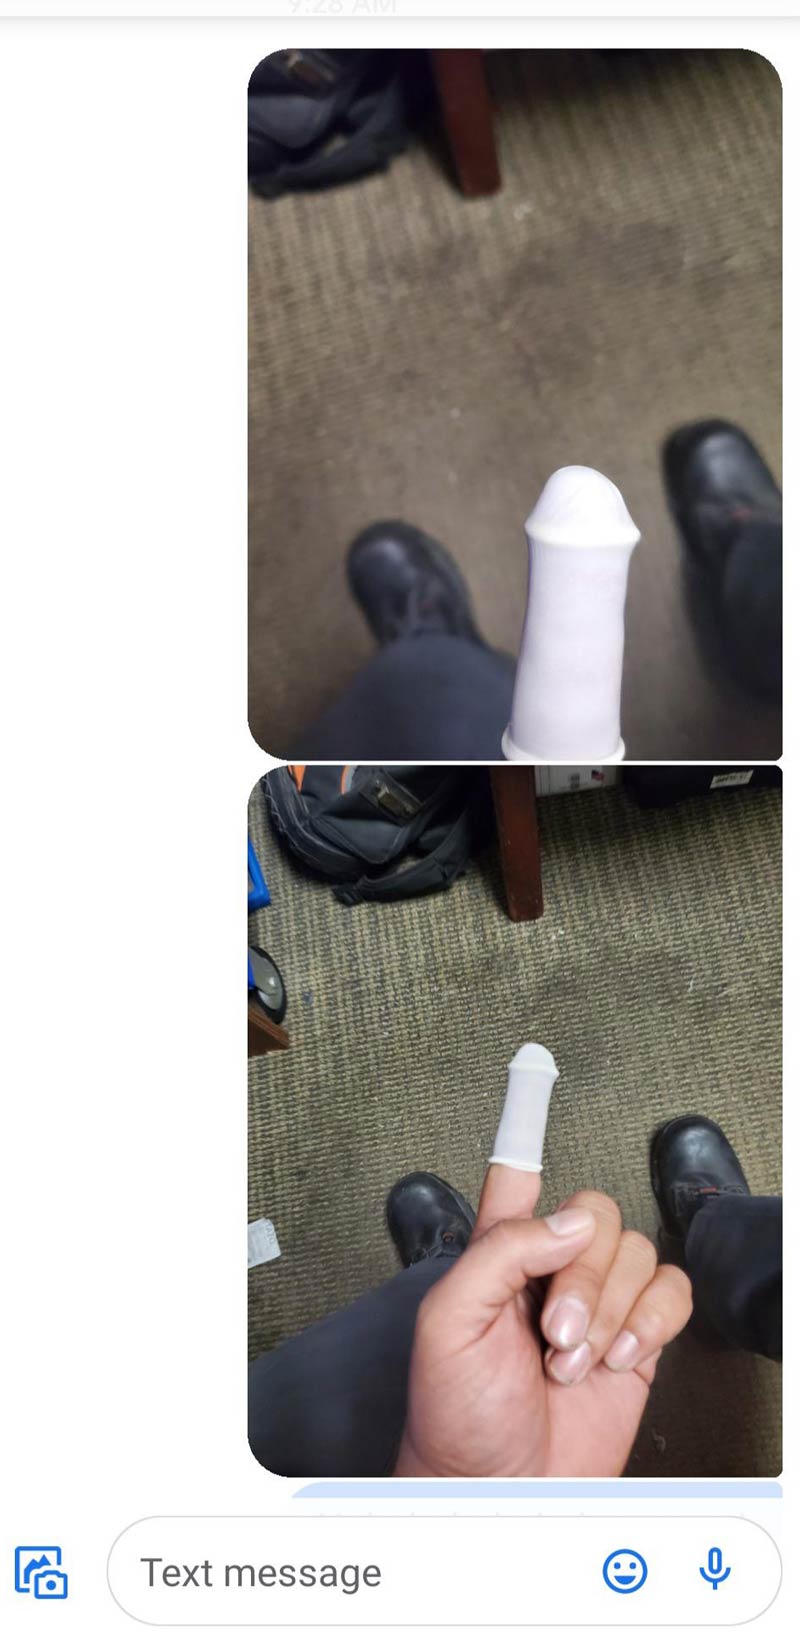 Cut my finger at work and sent a picture to my wife